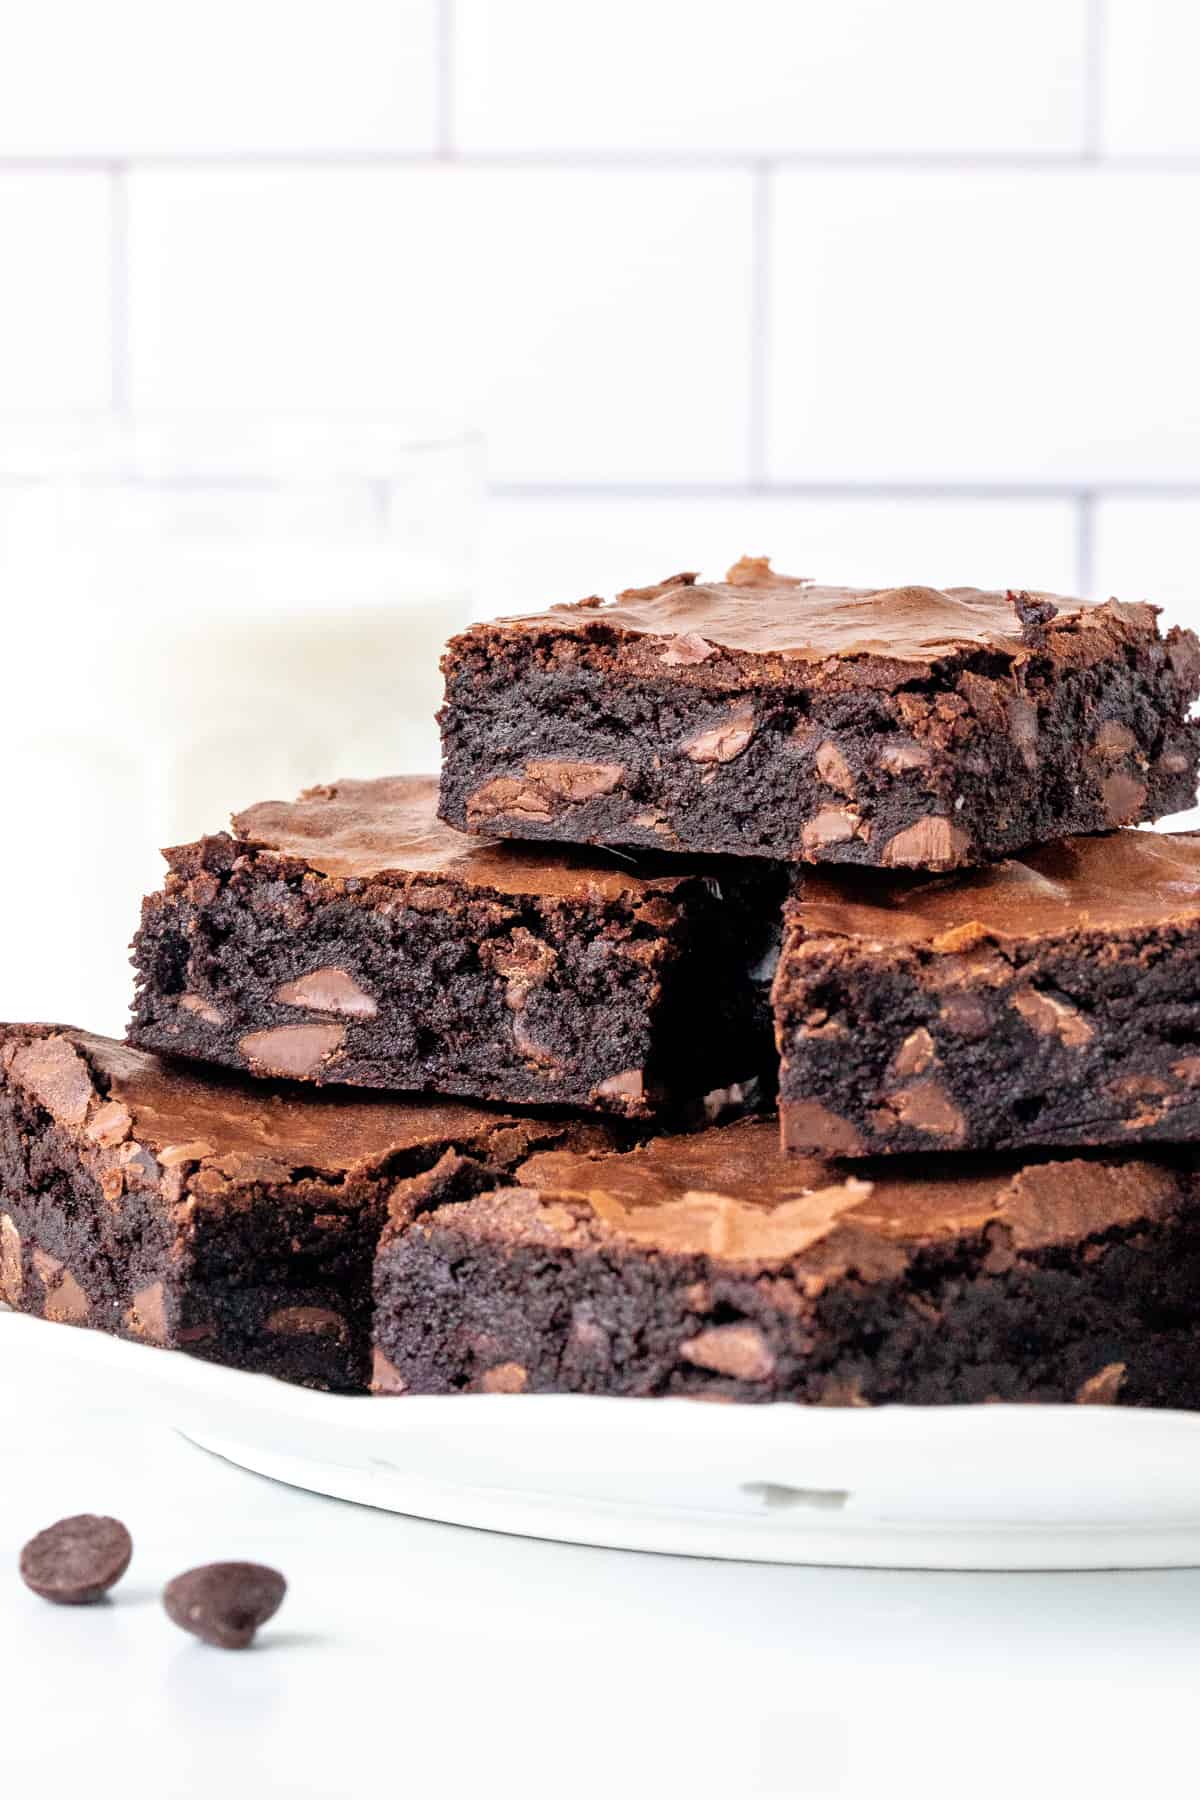 Plate of chocolate chip brownies